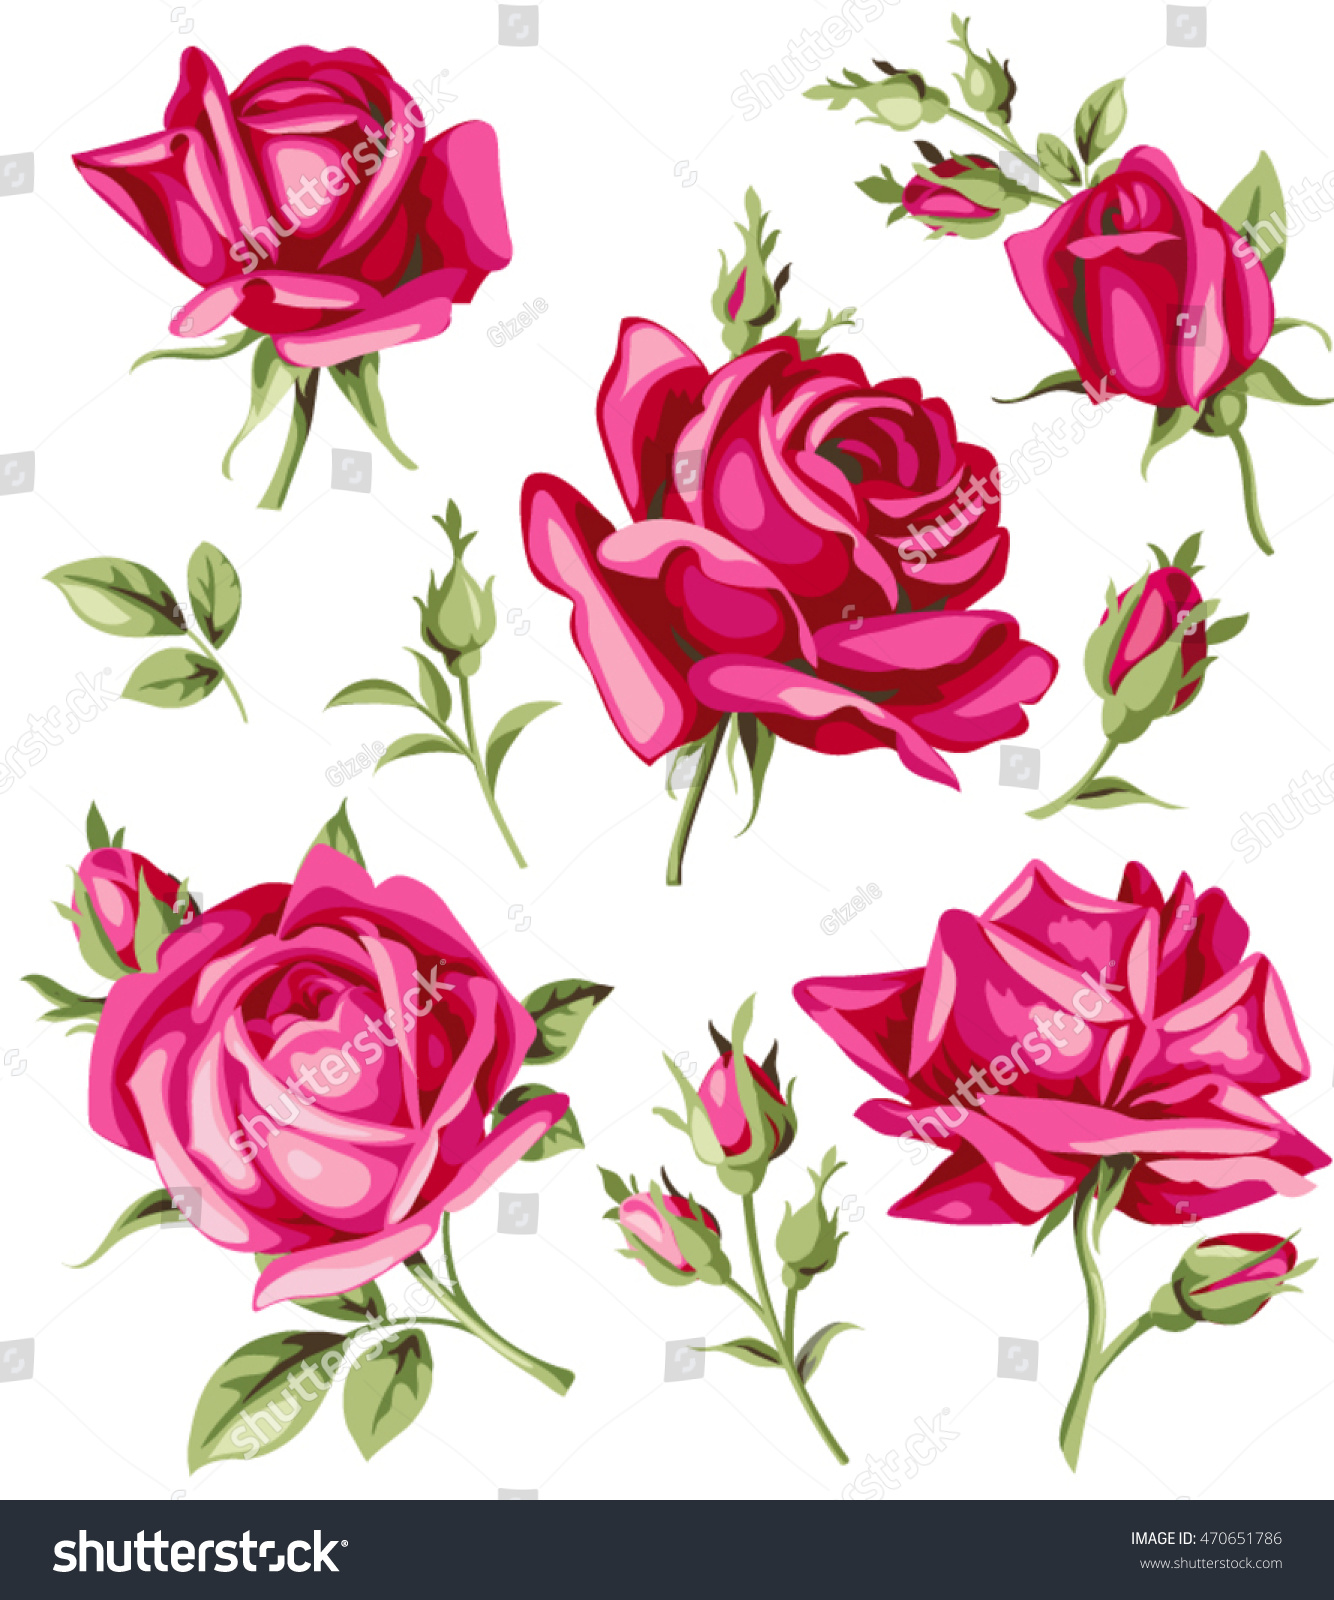 Vintage Red Rose Bud Set Vector Stock Vector (Royalty Free) 470651786 ...